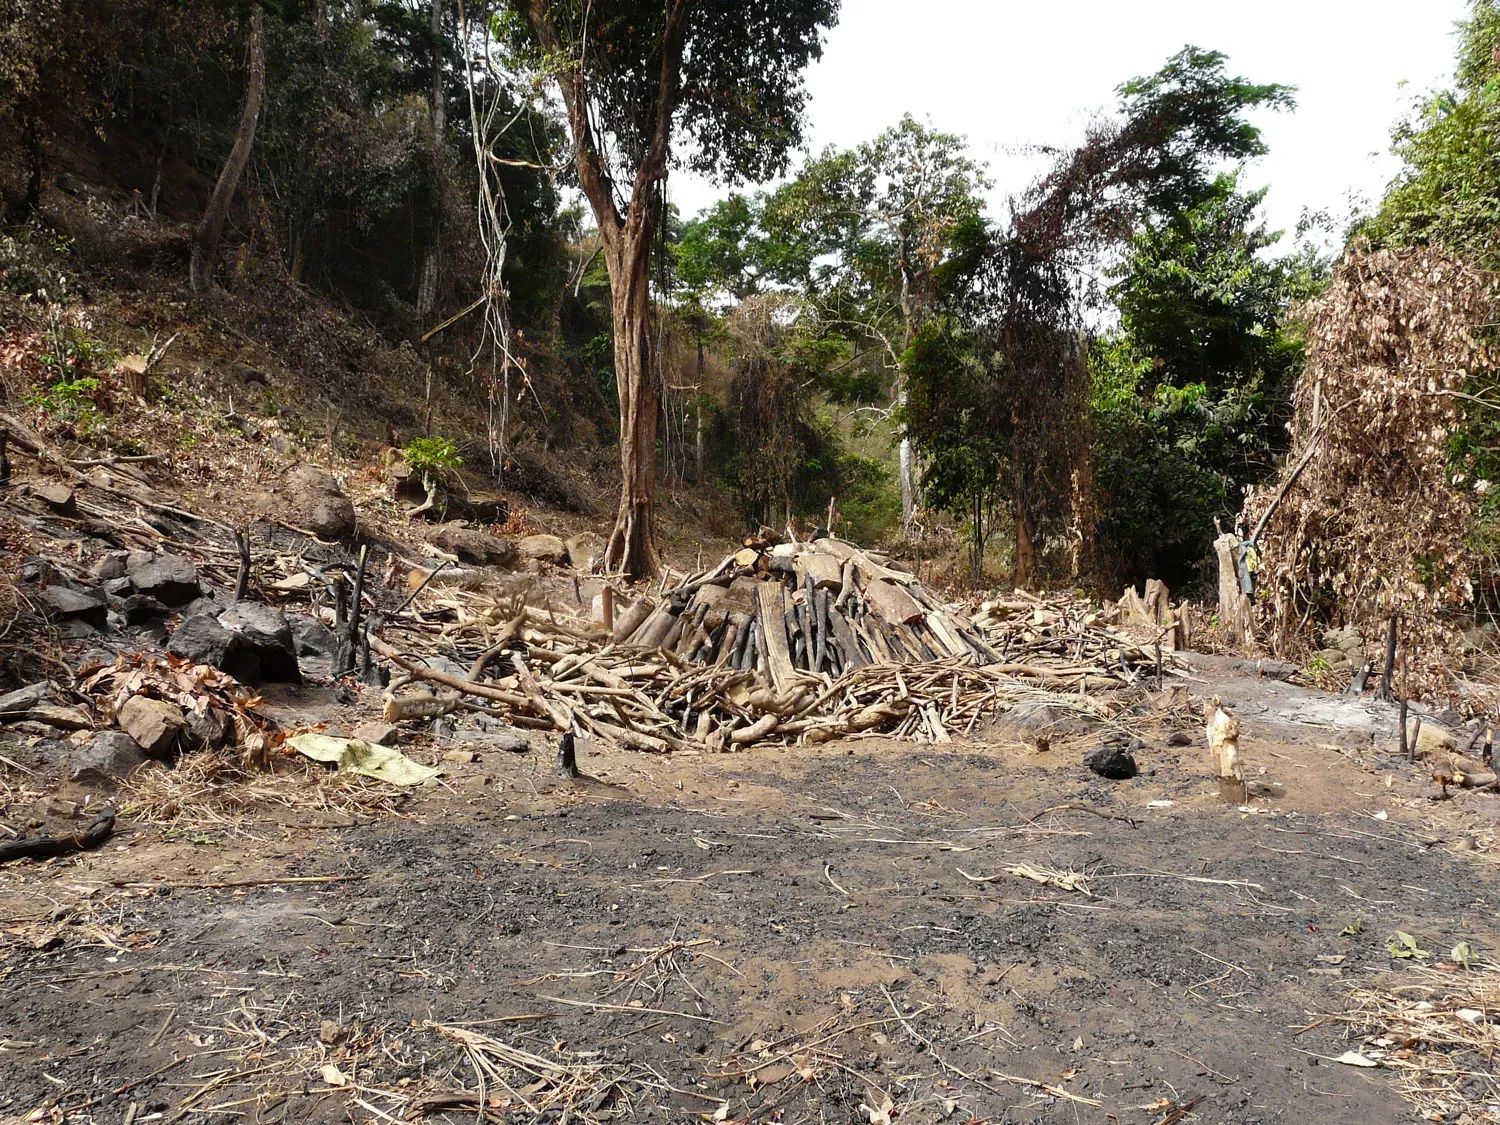 Area of forest cleared with piles of wood and charcoal